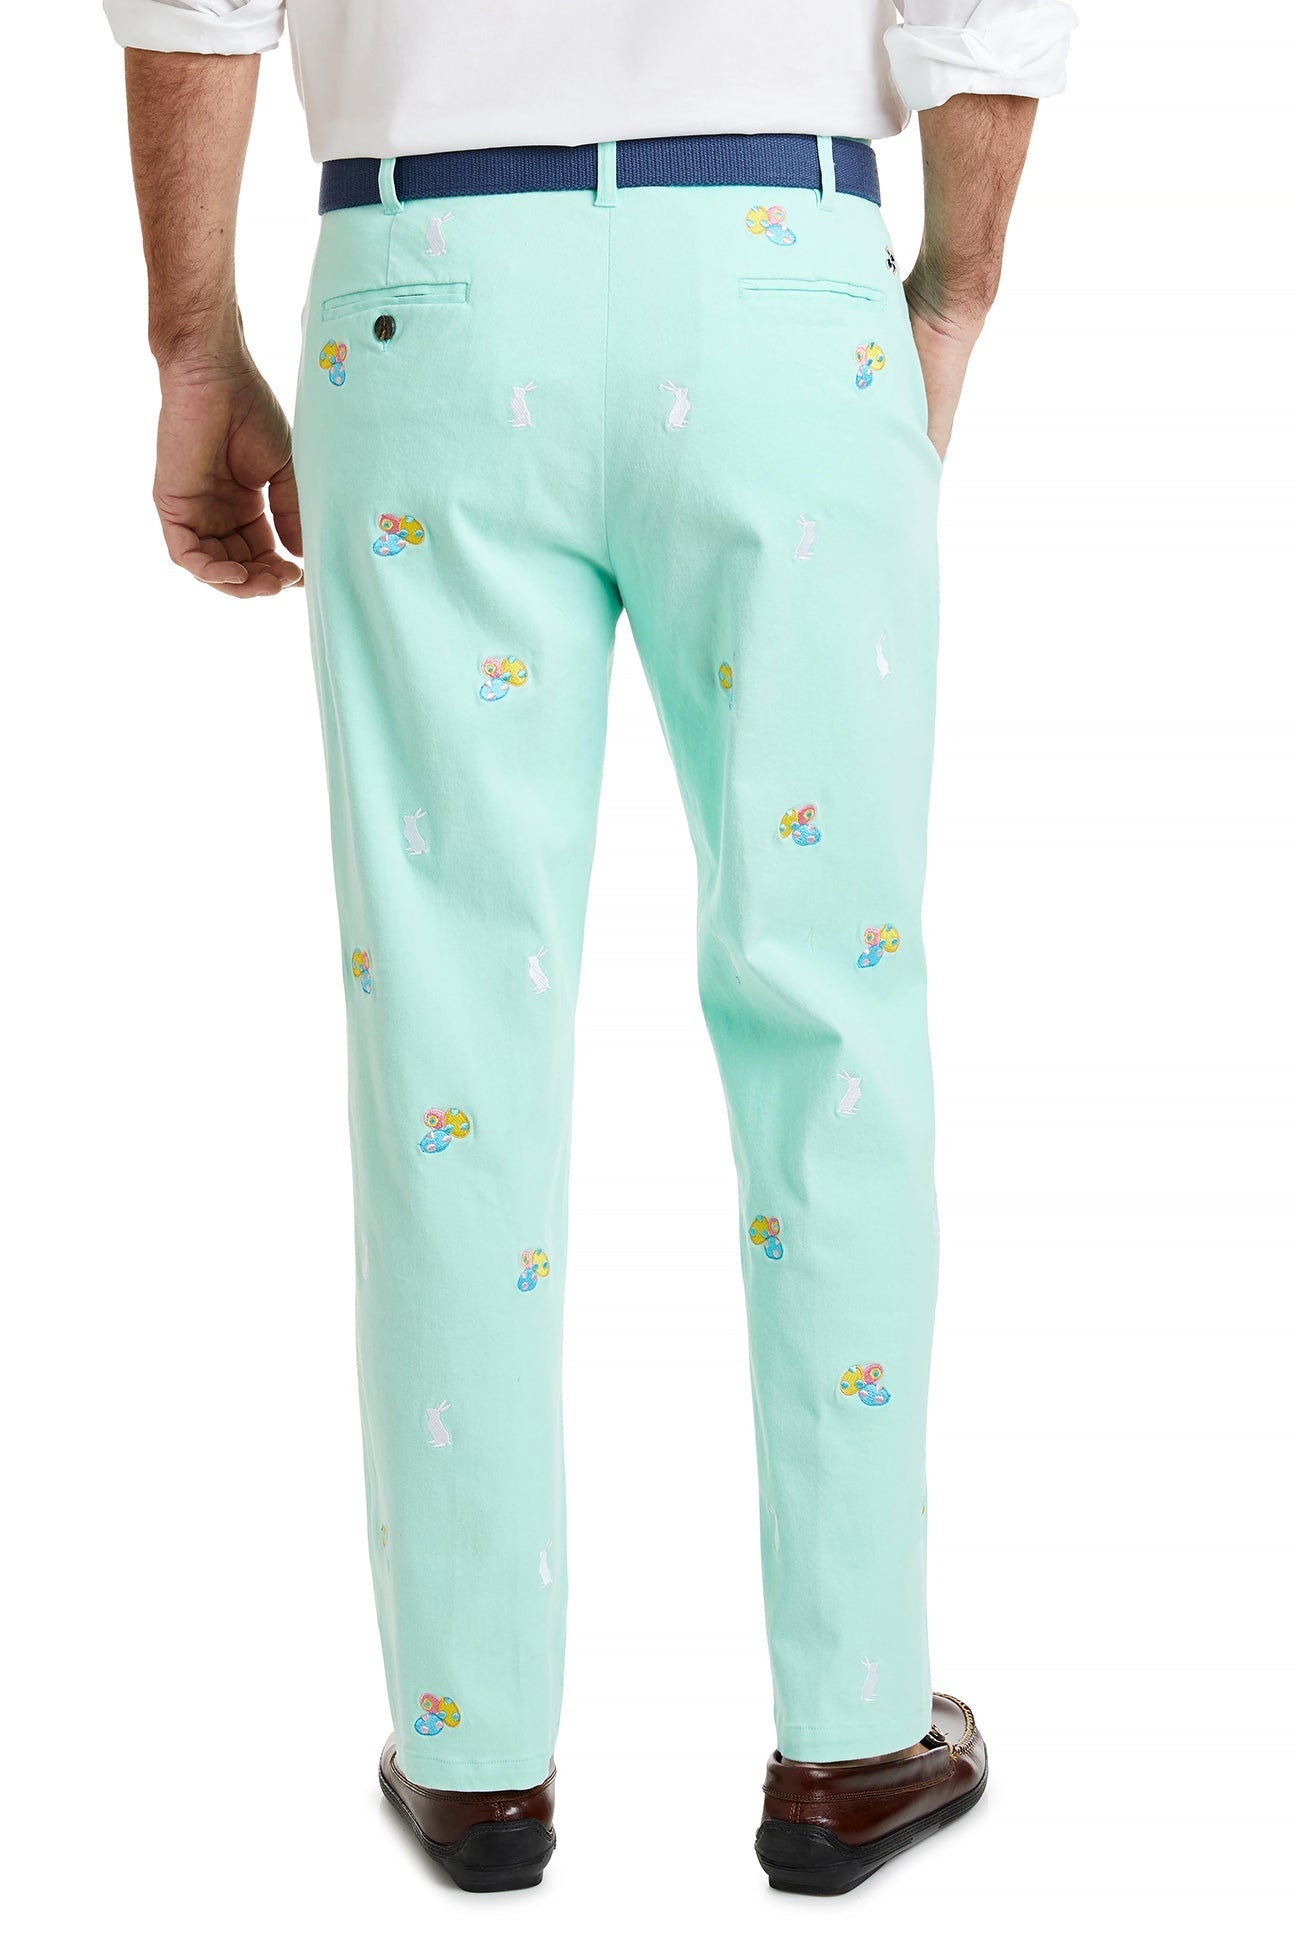 https://www.castawayclothing.com/cdn/shop/products/harbor-pant-stretch-twill-seagrass-with-easter-eggs-bunny-castaway-nantucket-island-mens-embroidered-pants-28844956811351.jpg?v=1699563113